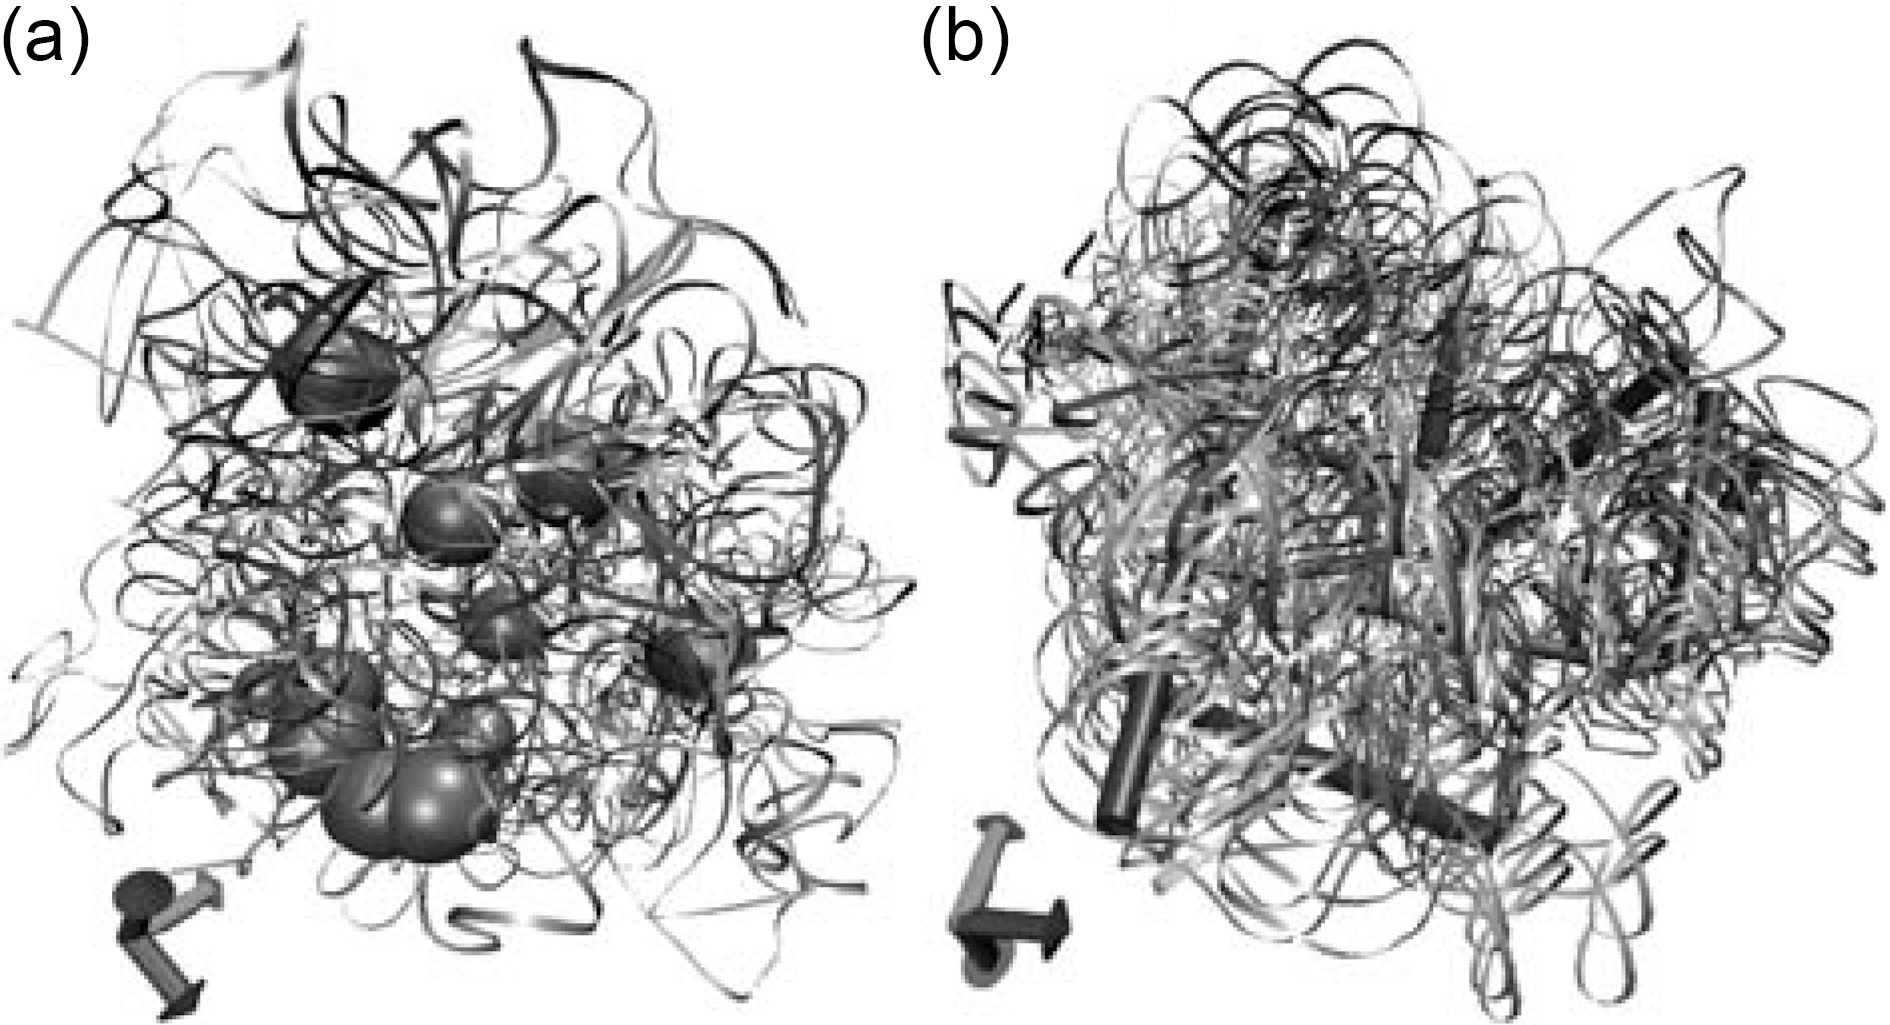 3-D schematic demonstration of nanocomposite systems: (a) with spherical fillers (such as Al2O3 and SiO2) (b) with rodlike filler (such as clay or carbon nanotubes) [18].